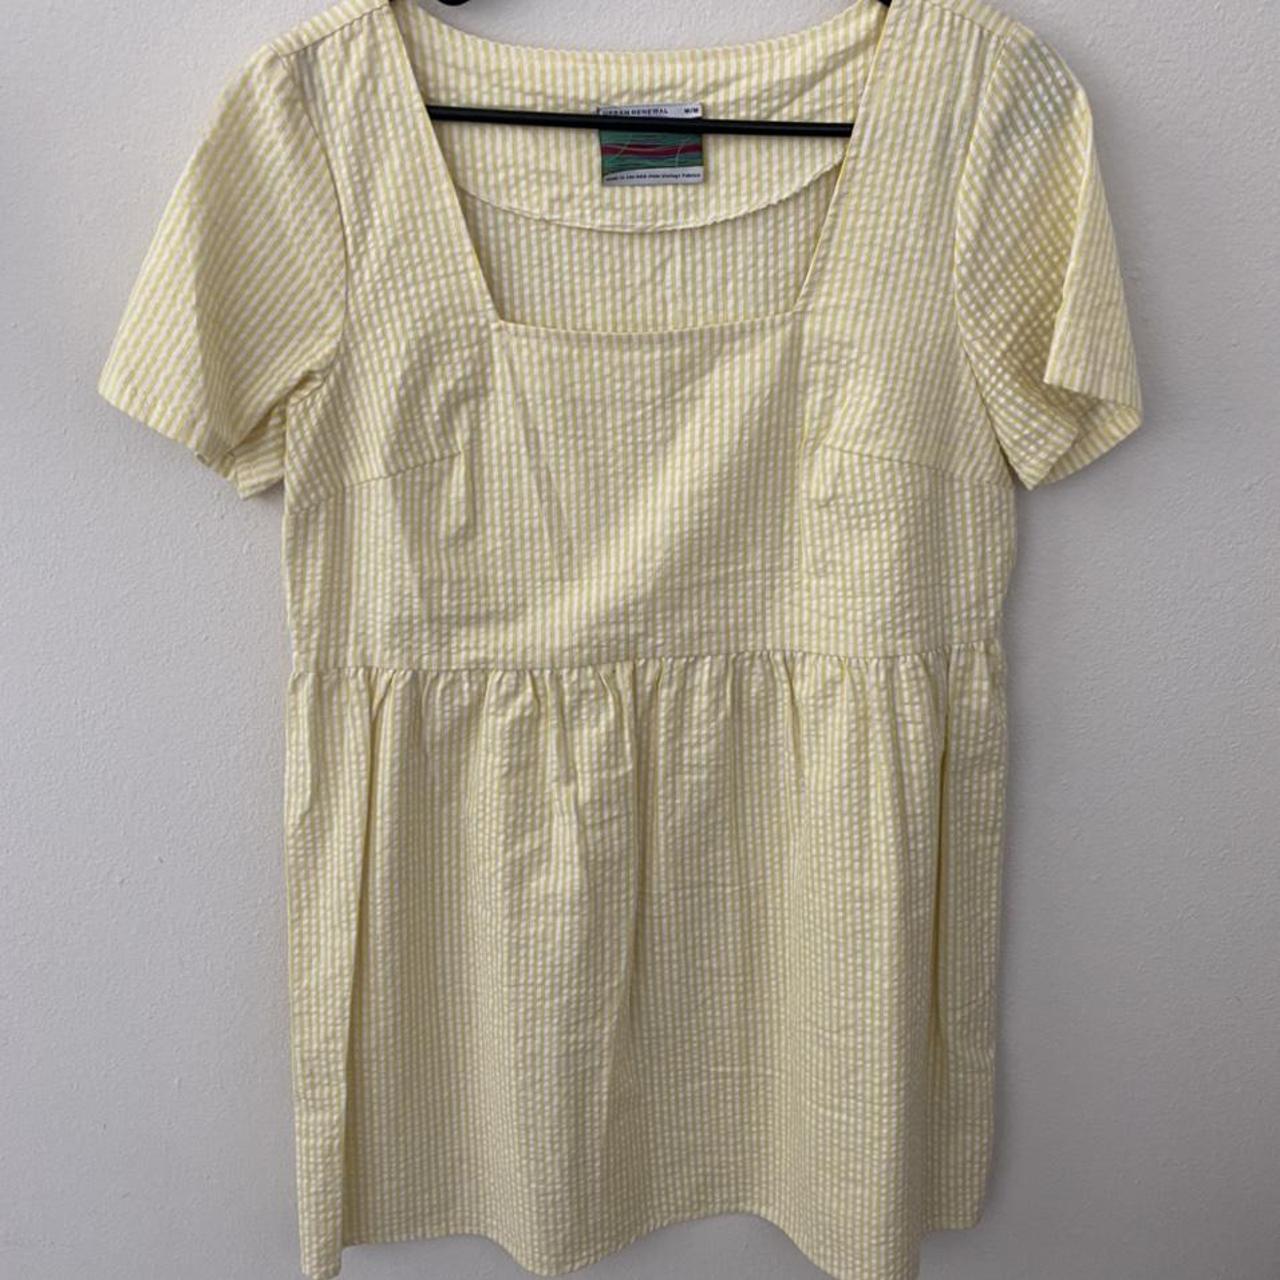 Urban Outfitters Women's White and Yellow Dress (2)